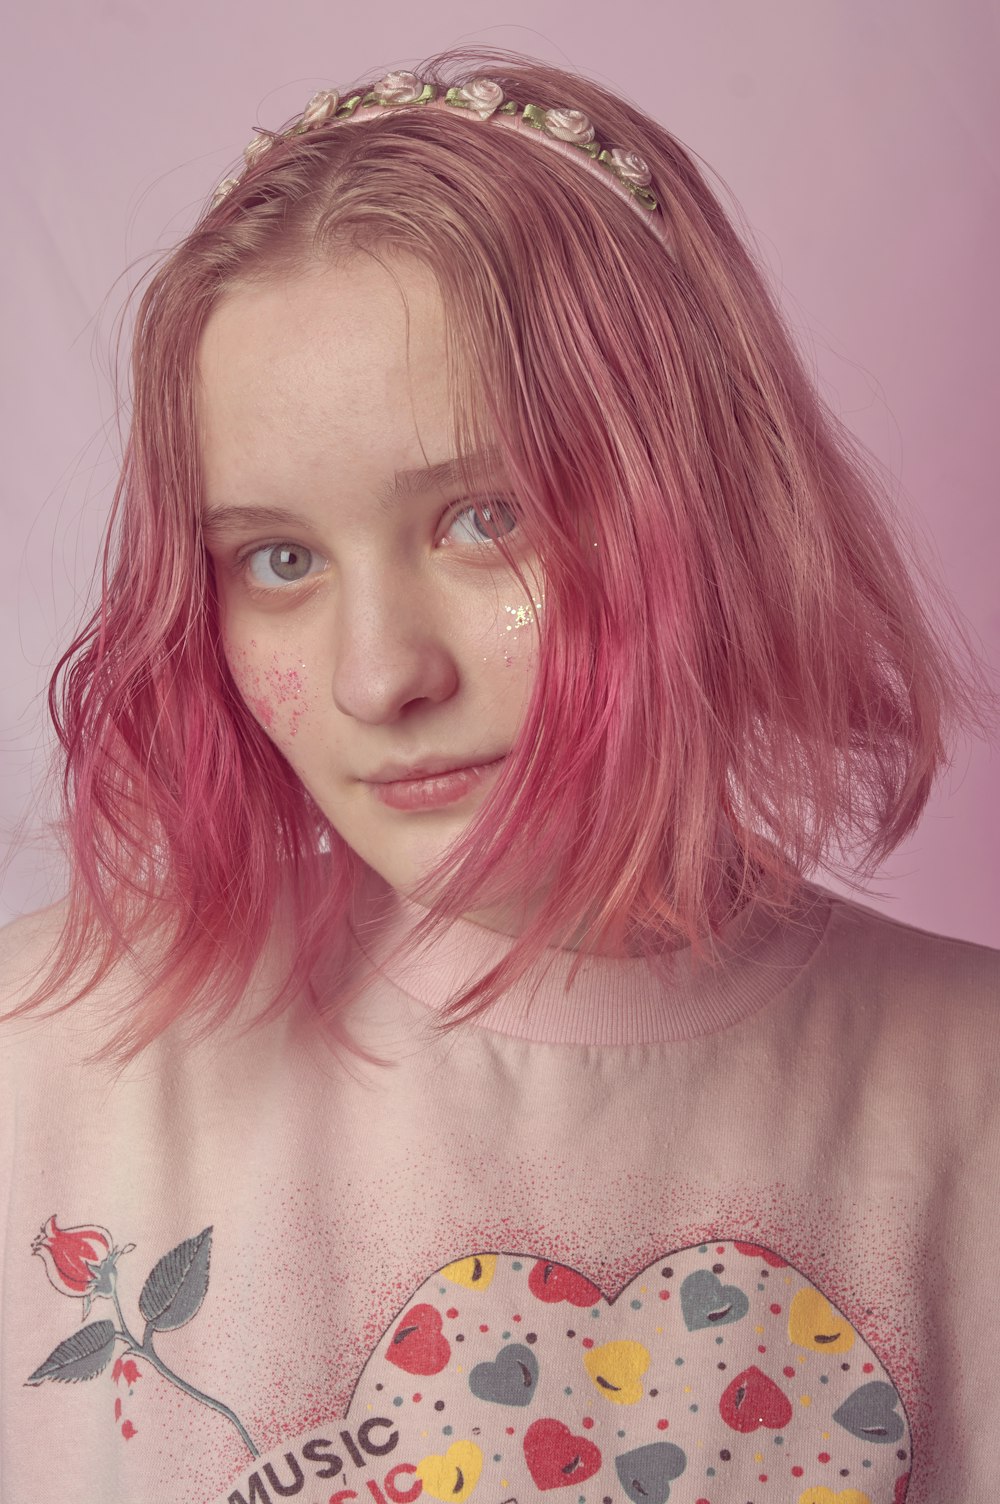 a girl with pink hair wearing a t - shirt with hearts on it